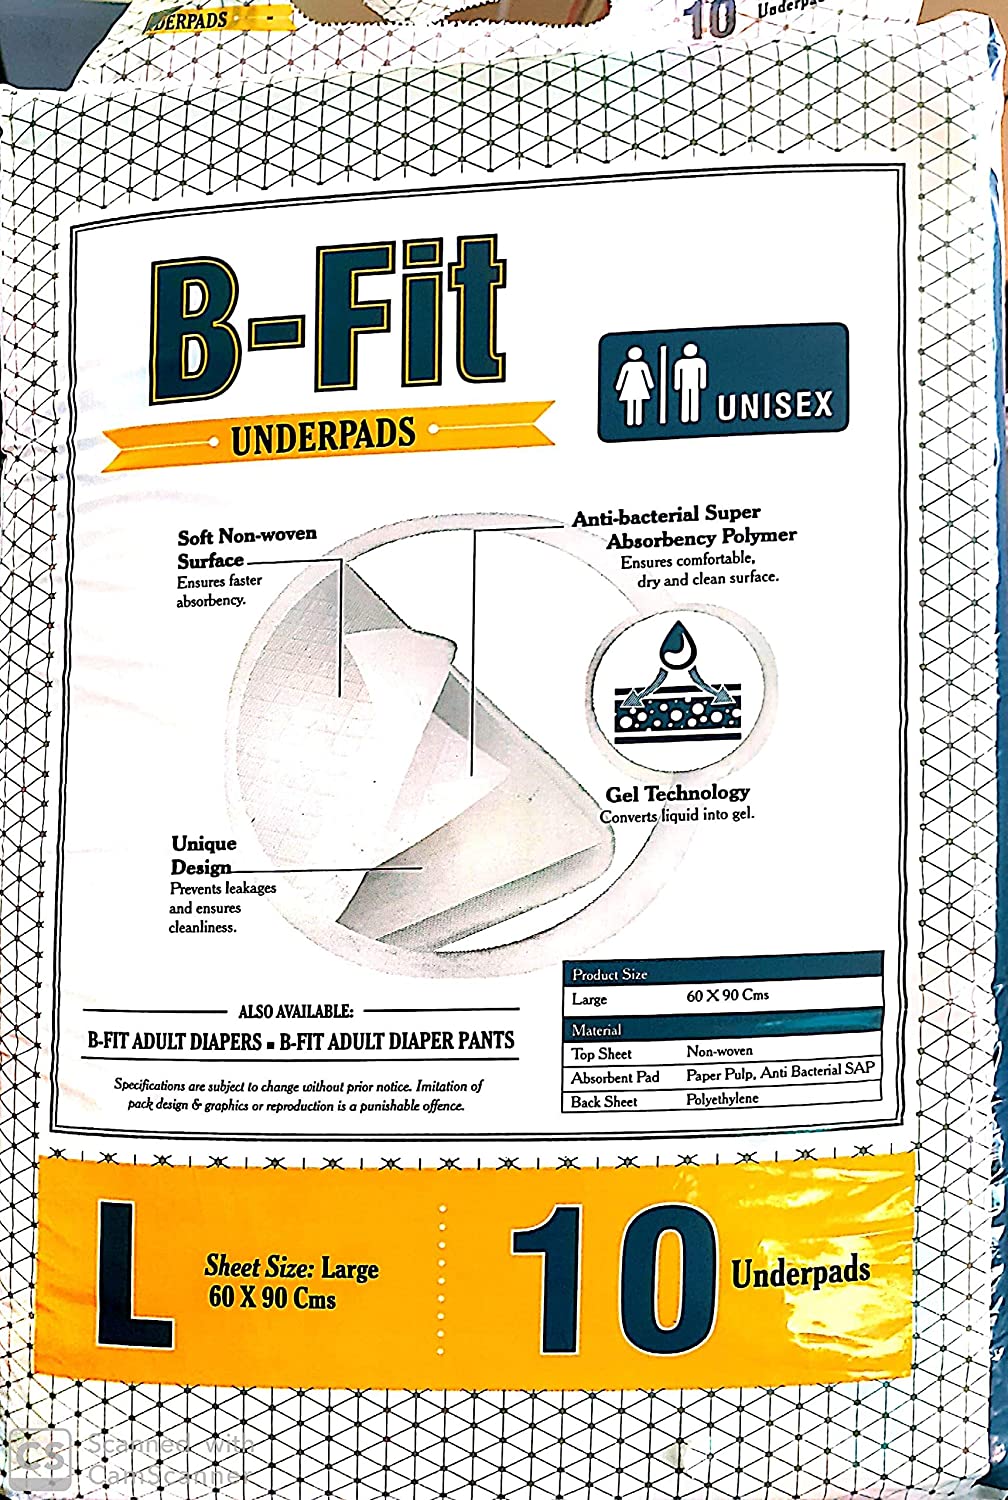 B-FIT Adult Diapers Pant Style - Medium Size - Pack of 1 (Unit Count 10) :  Amazon.in: Health & Personal Care